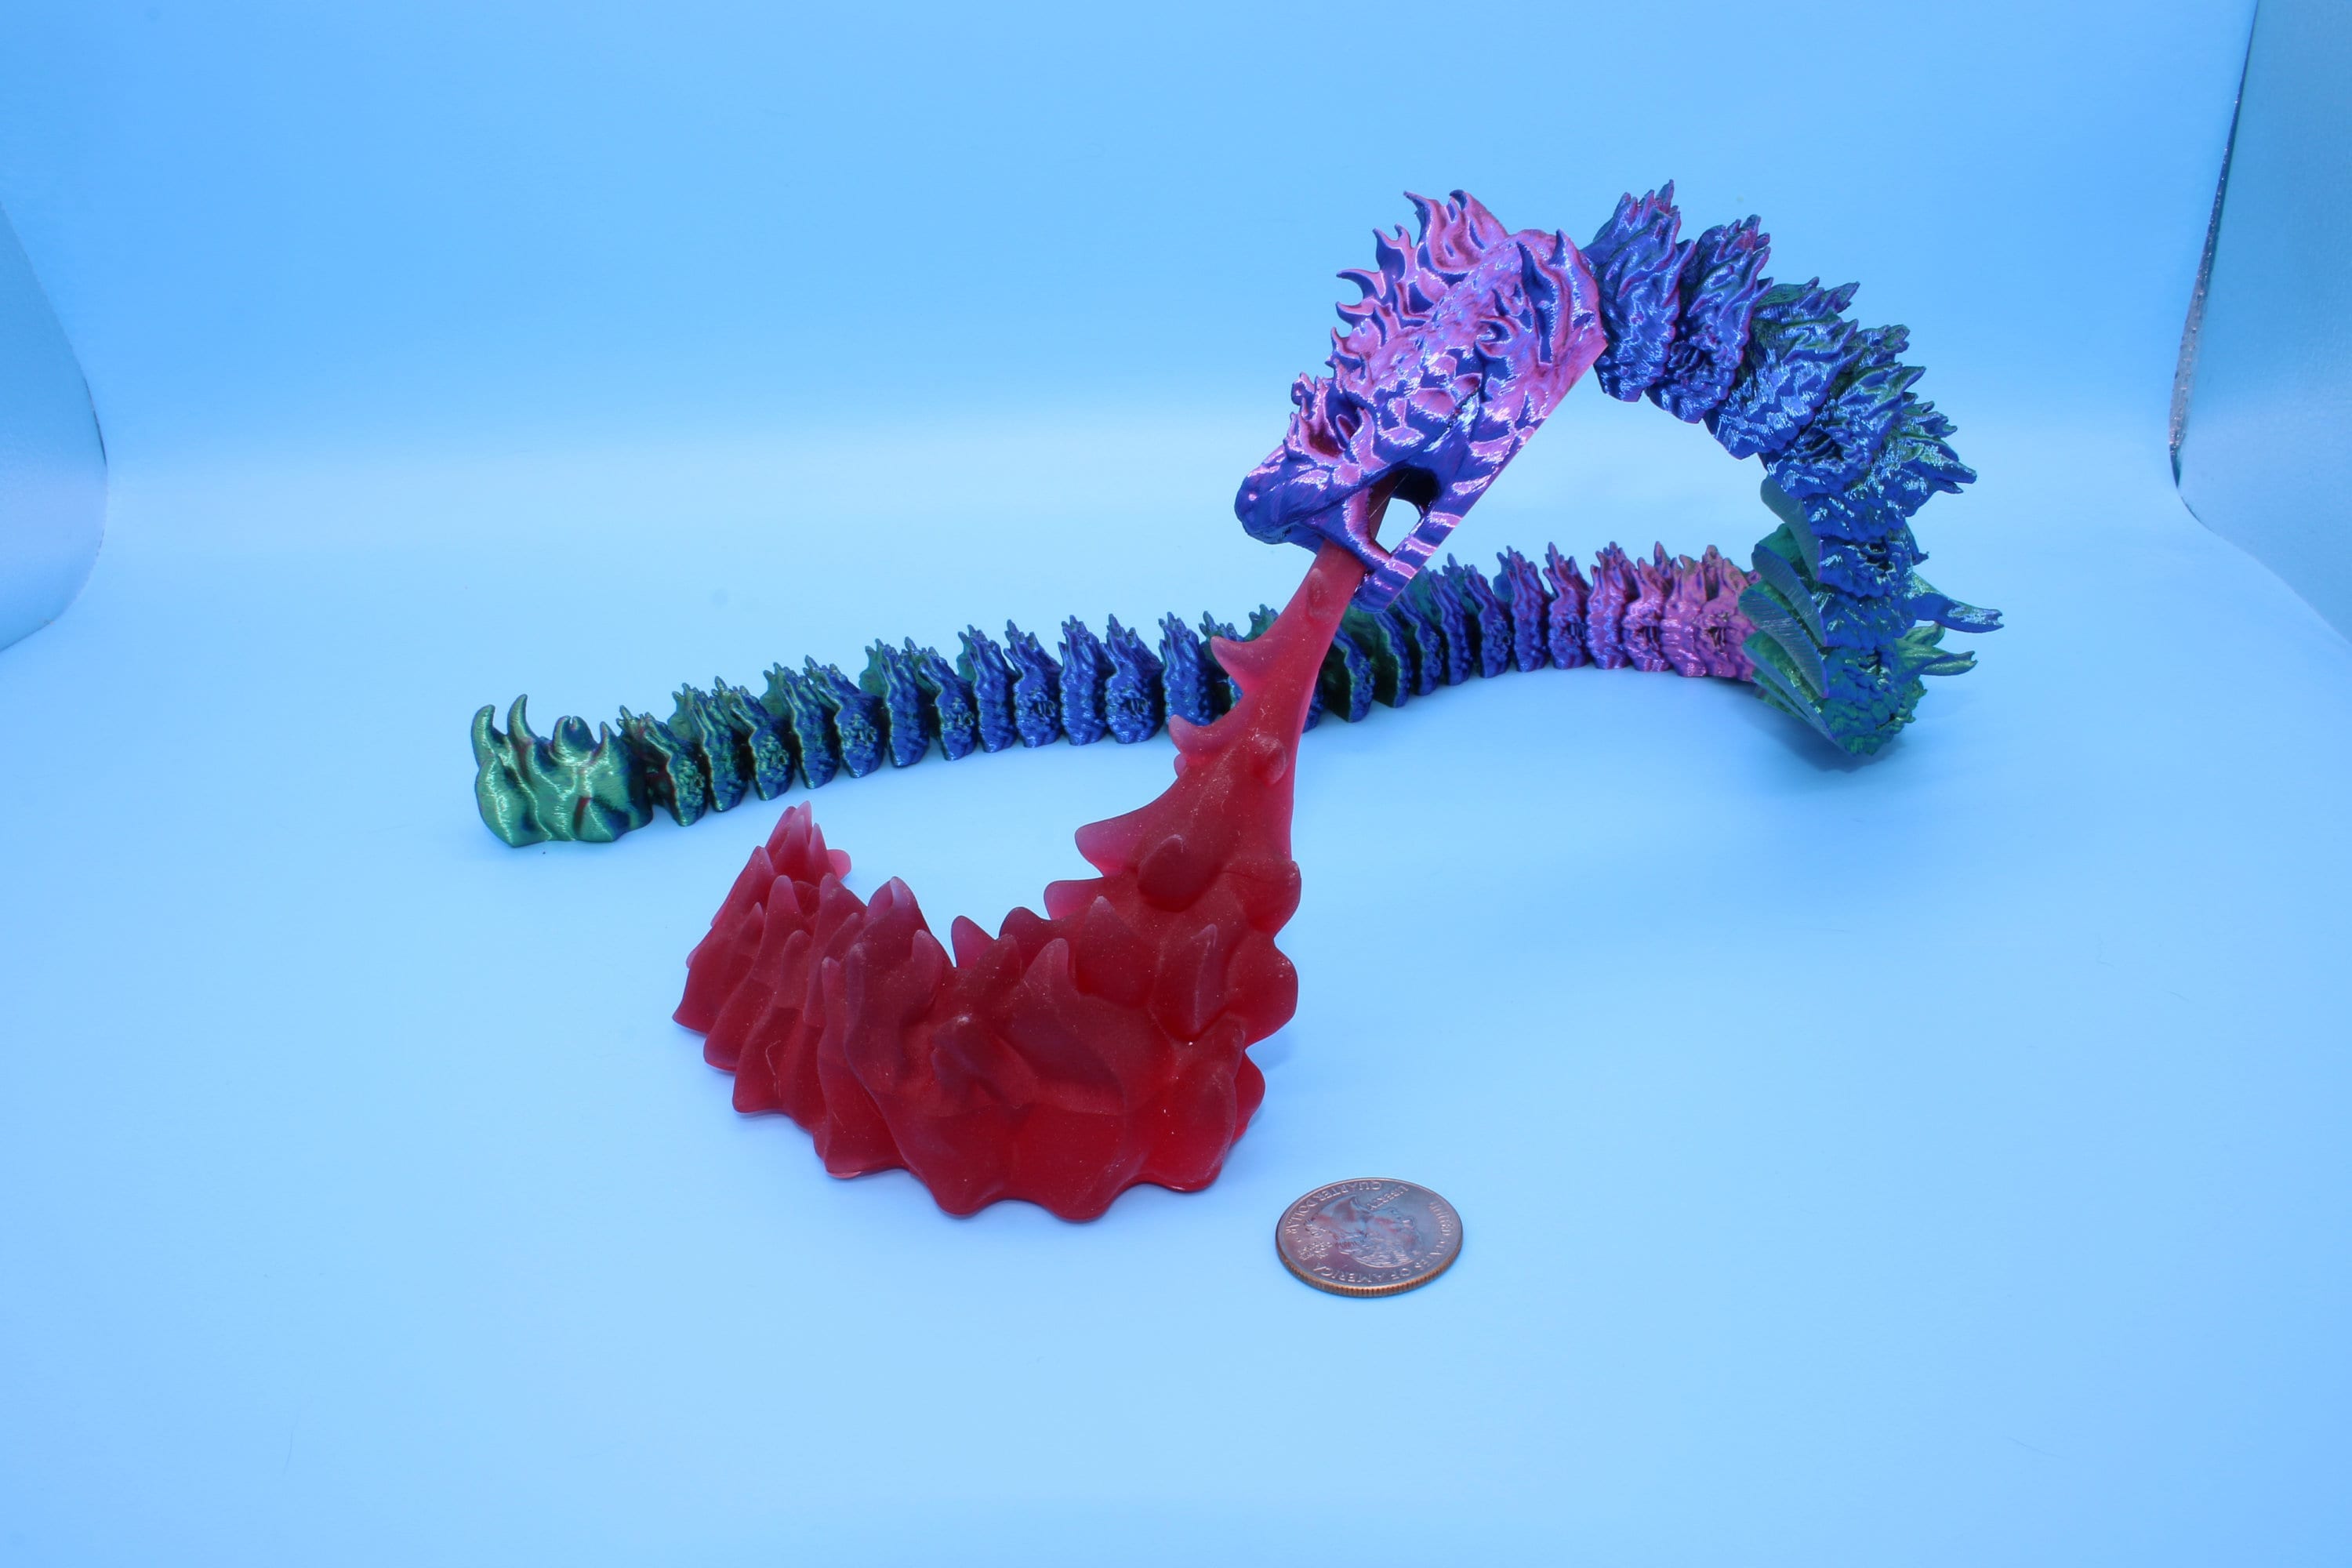 Articulating Boitata Dragon | 3D Printed | Multi Color Unique Dragon | Dragon With Flame Stand | Great Fidget Toy | Desk Buddy | Sensory Toy